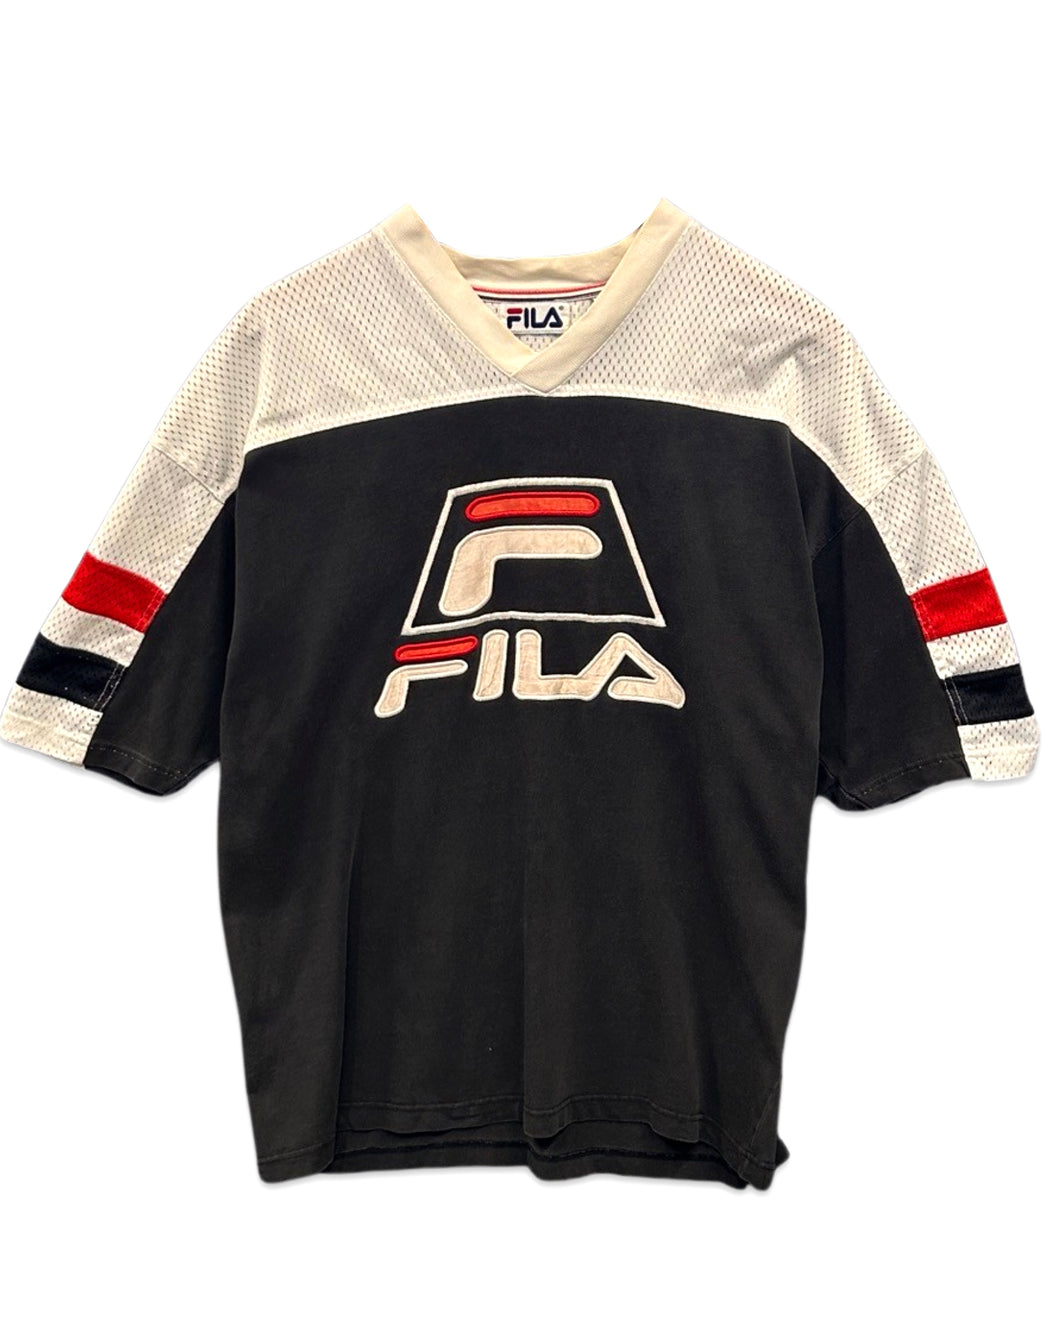 Fila Vintage Short Sleeve Perforated T-Shirt Jersey ⏐ Fits L